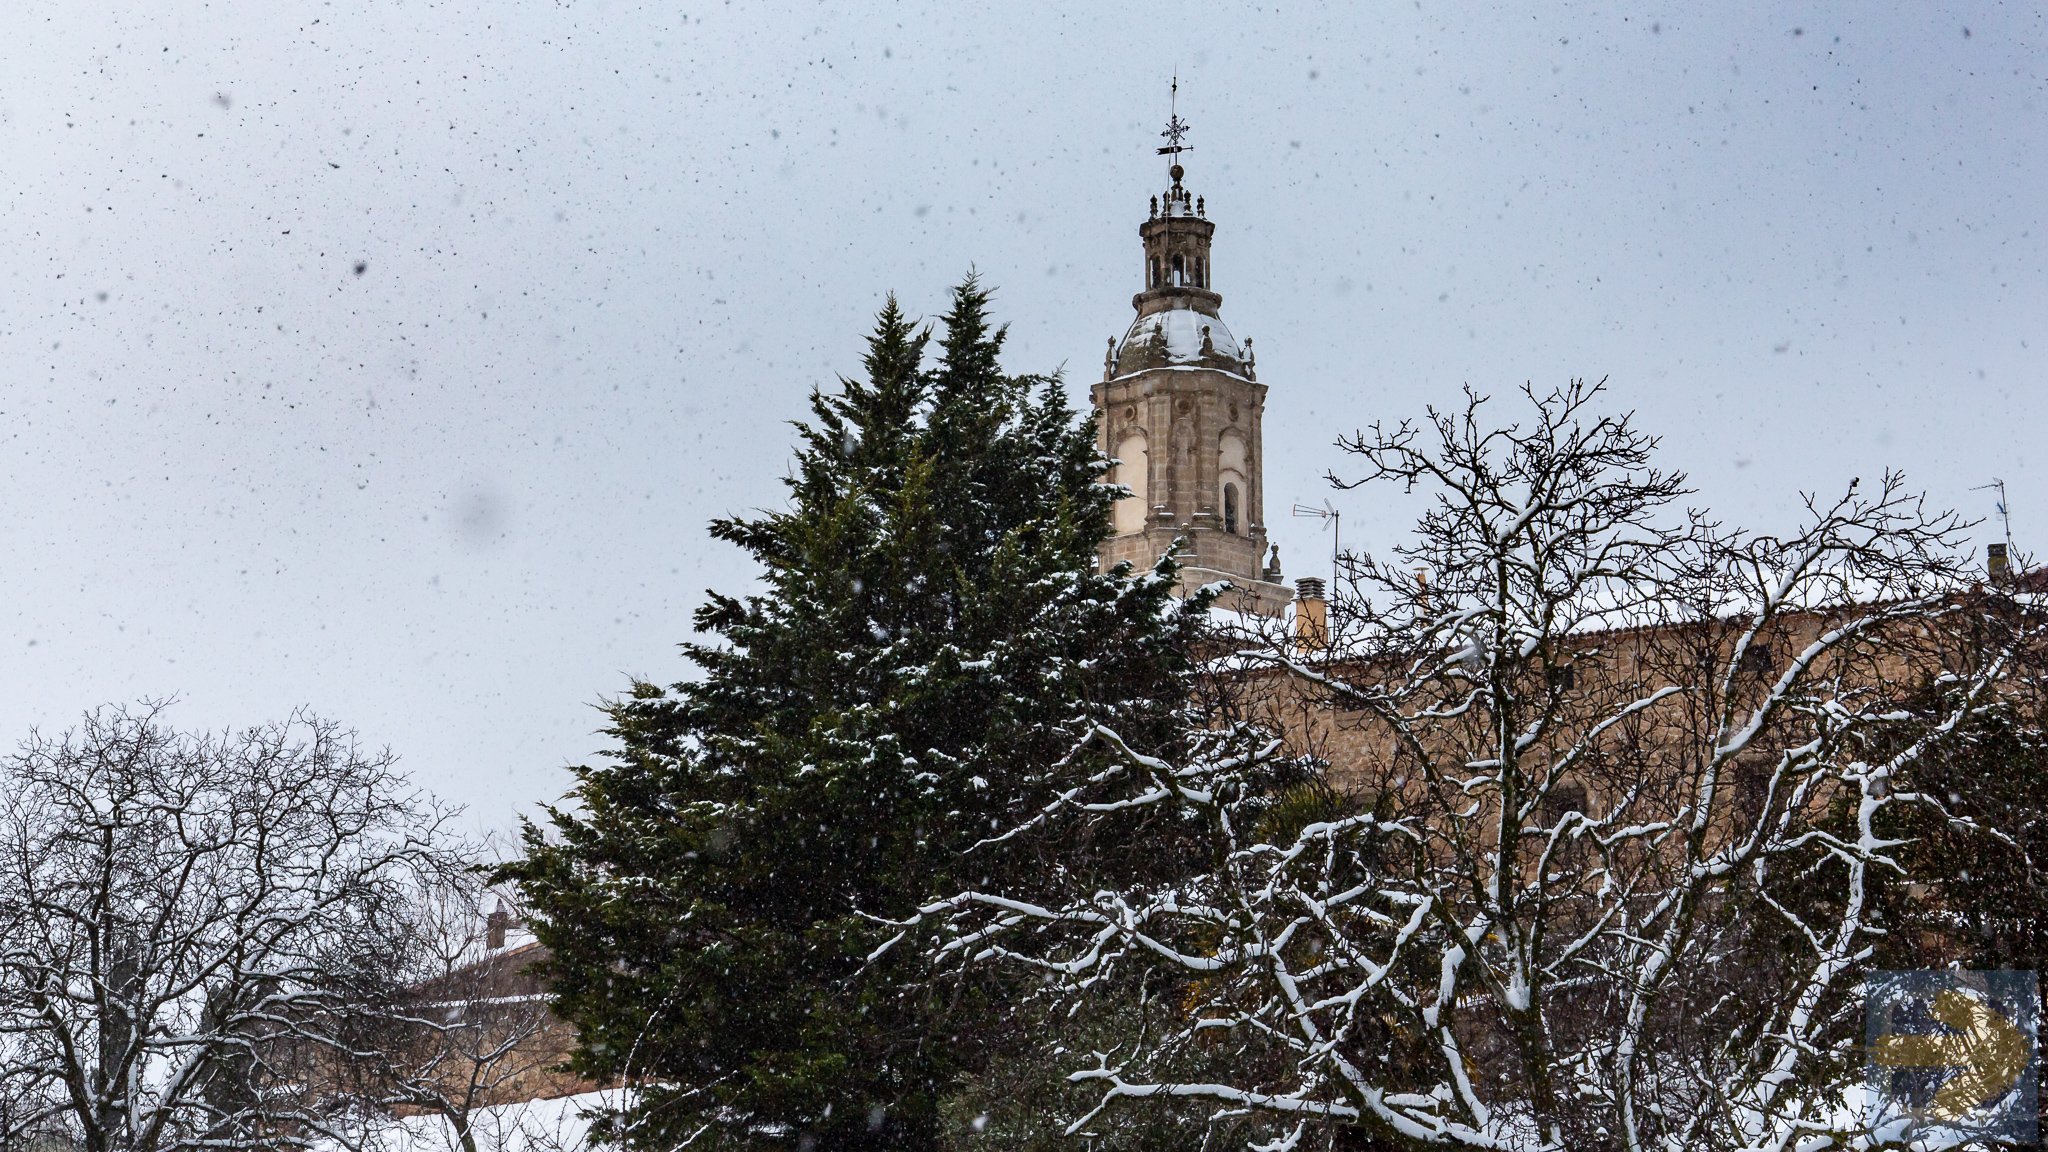 Midday Snow on the Iglesia de San Andres